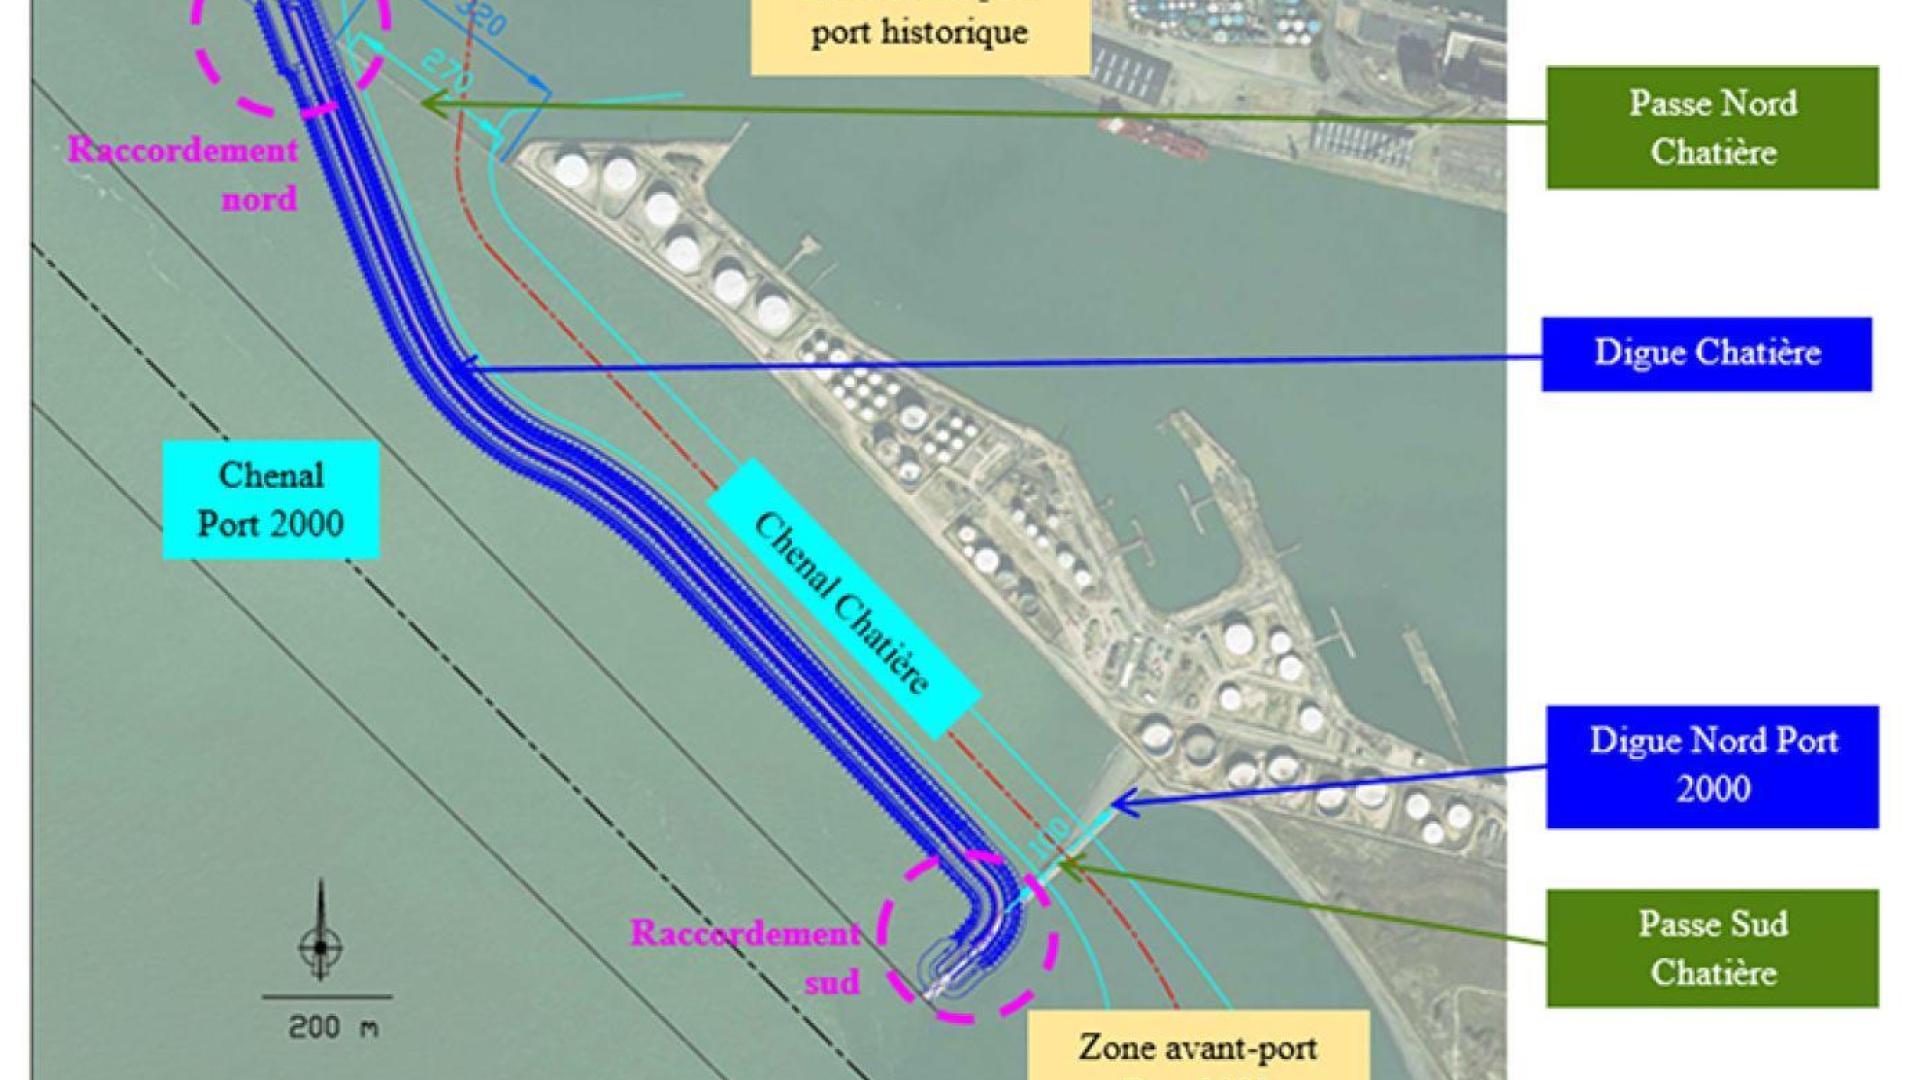 Green light for Seine-Port 2000 access channel